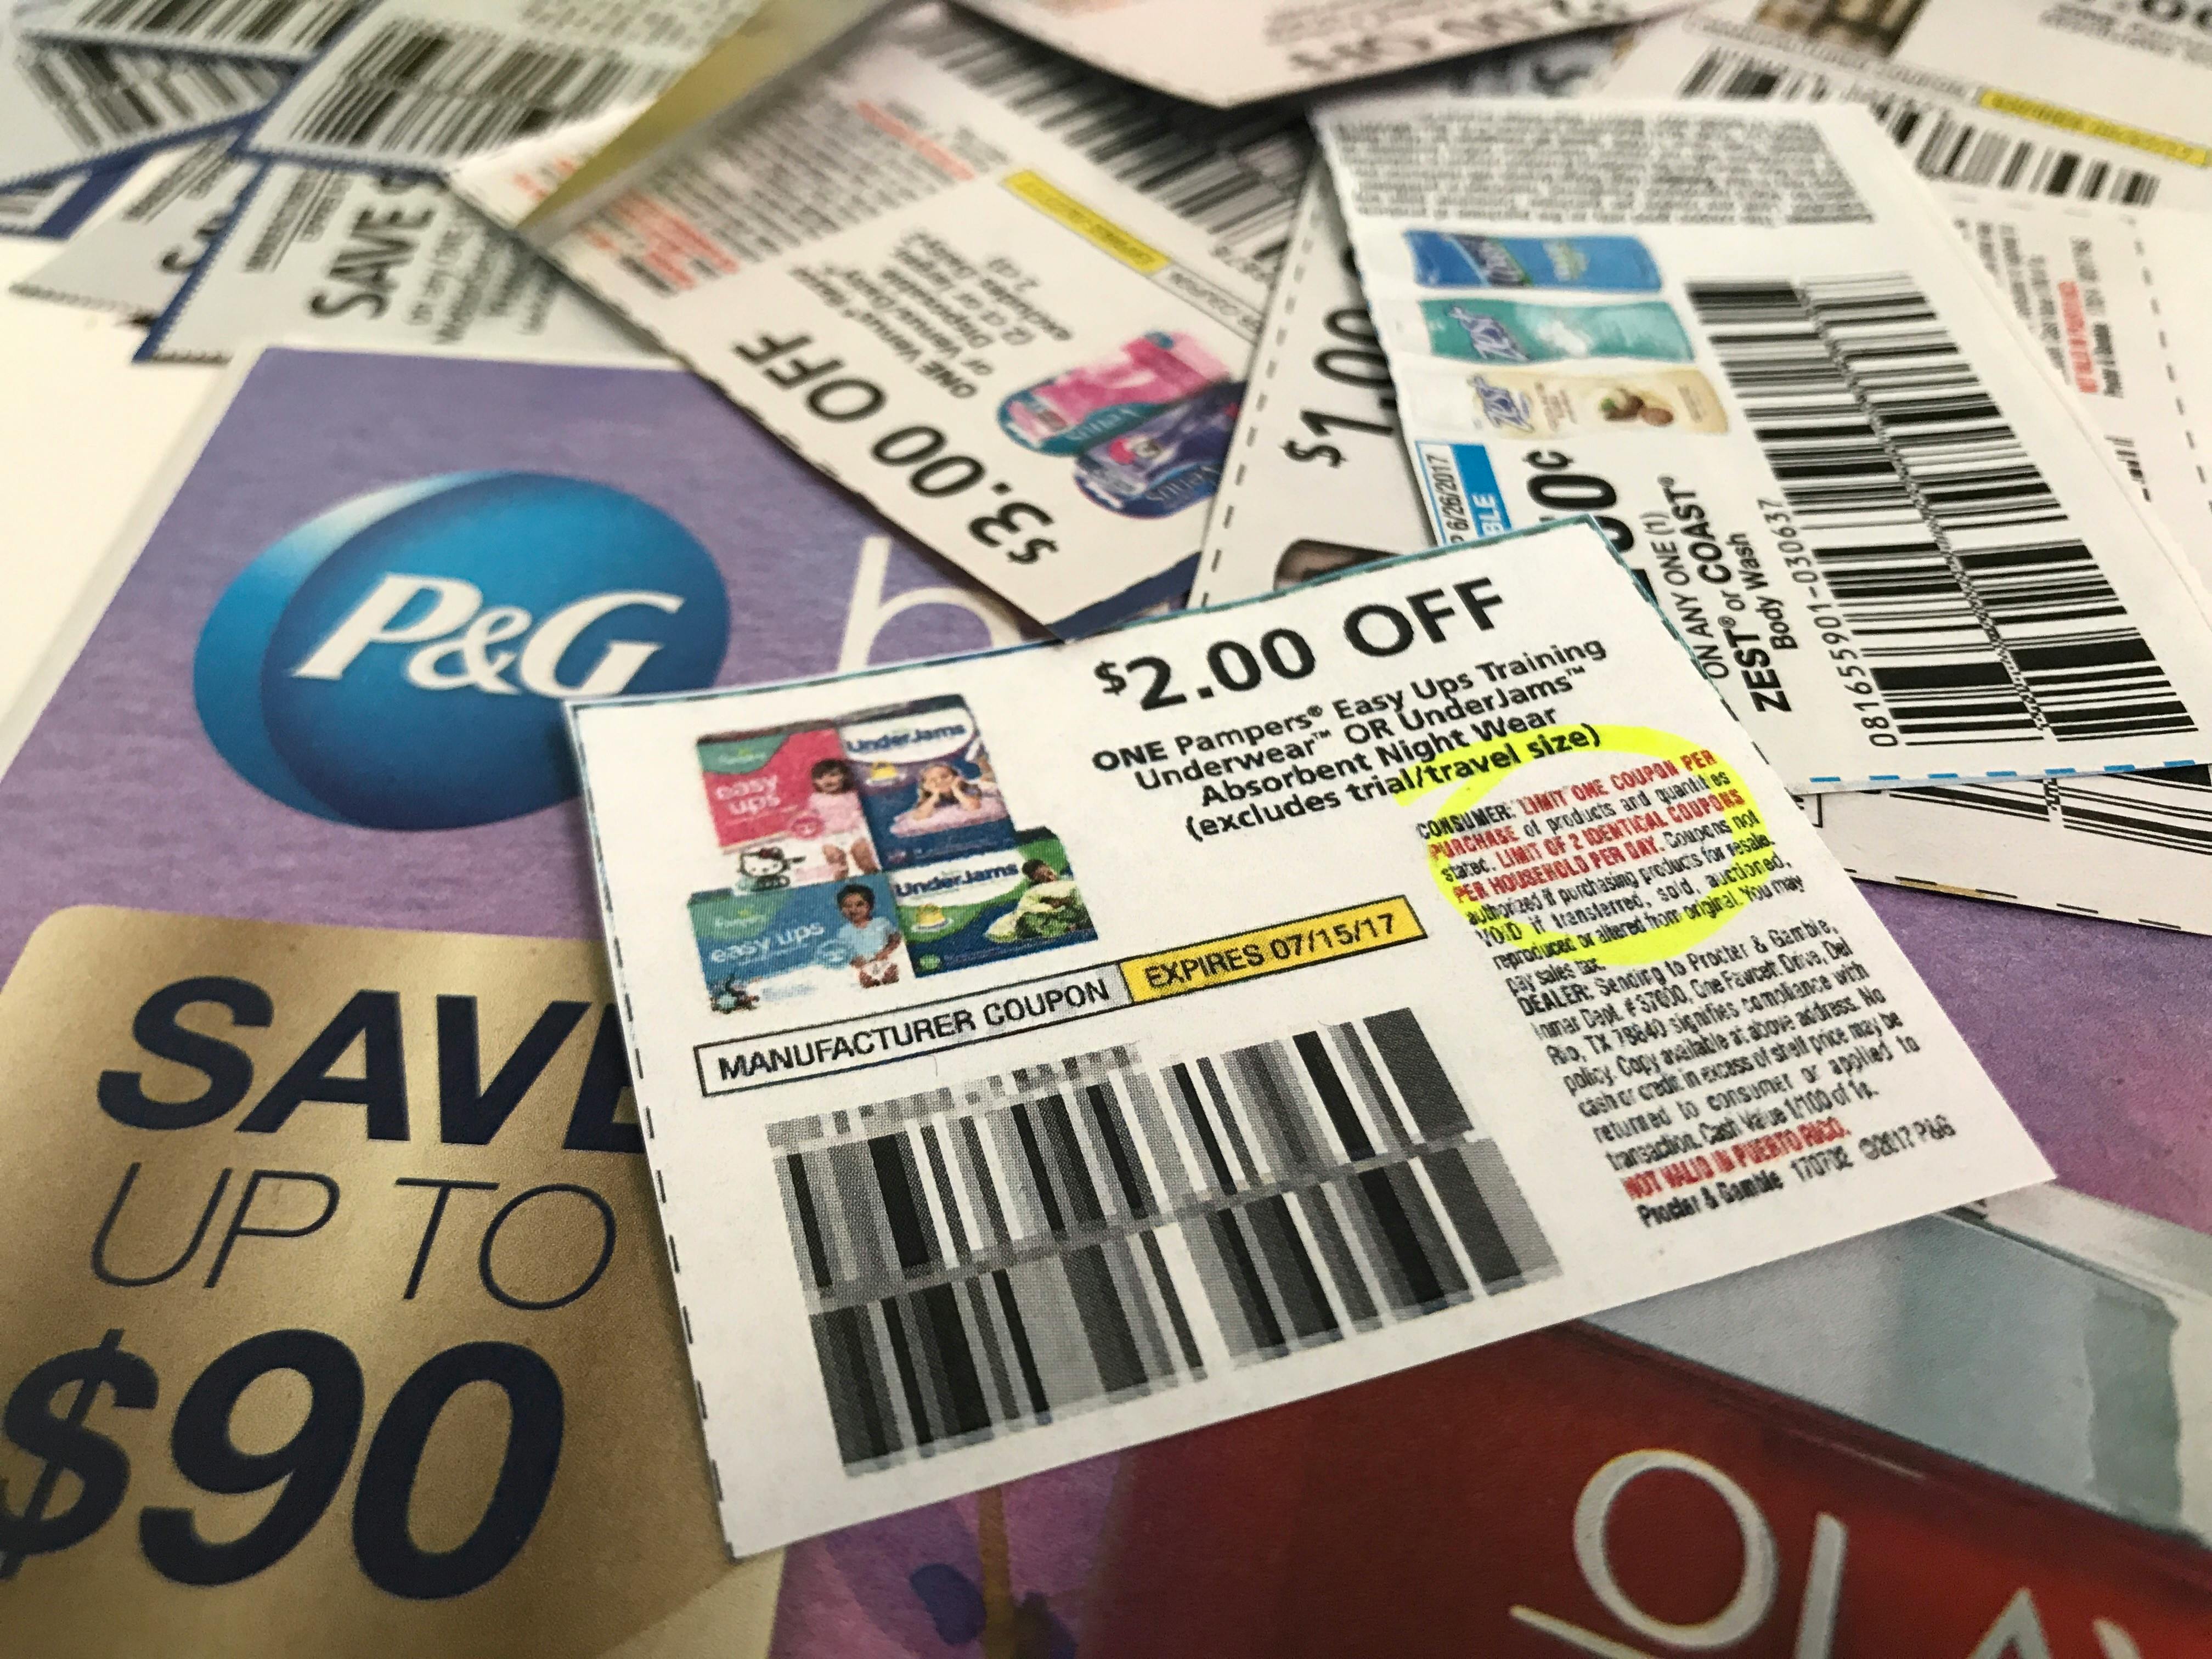 new-p-g-restrictions-your-printable-coupons-now-expire-in-one-day